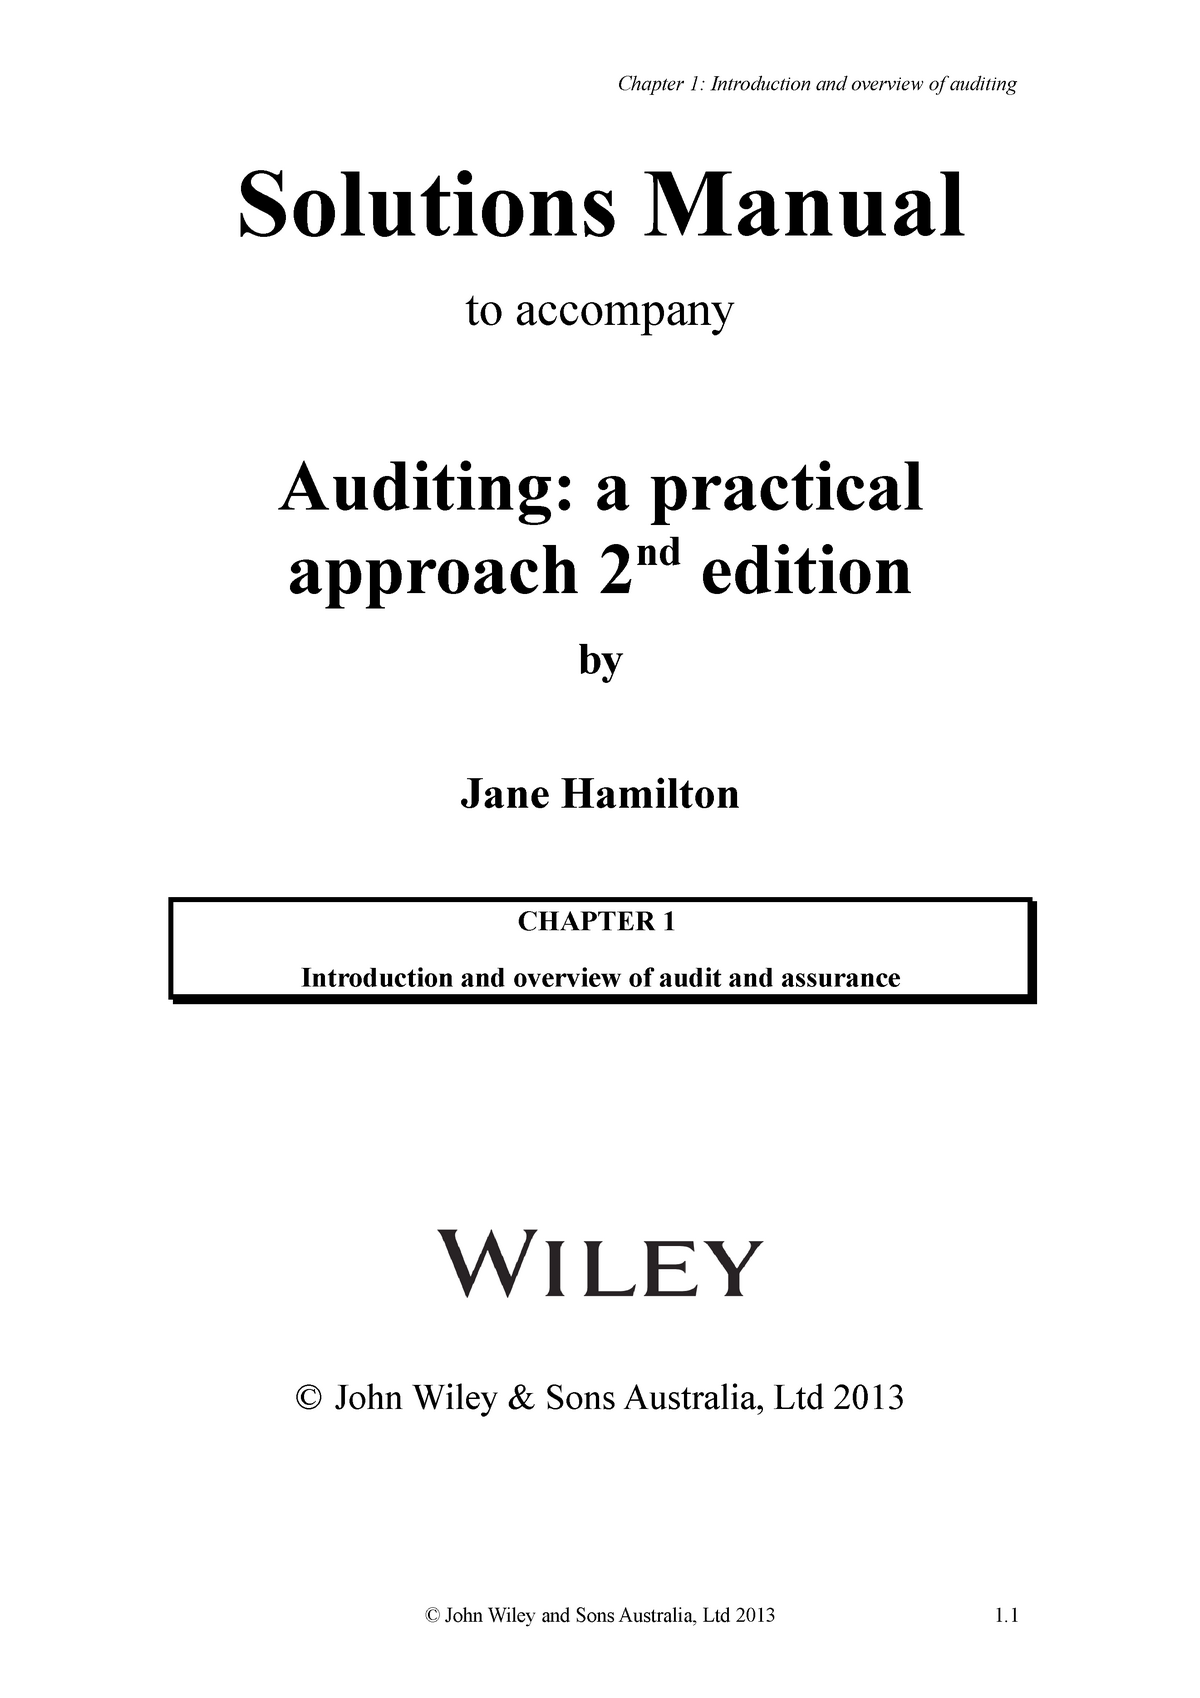 Ch01 sm moroney 2e Solutions Manual to Auditing a